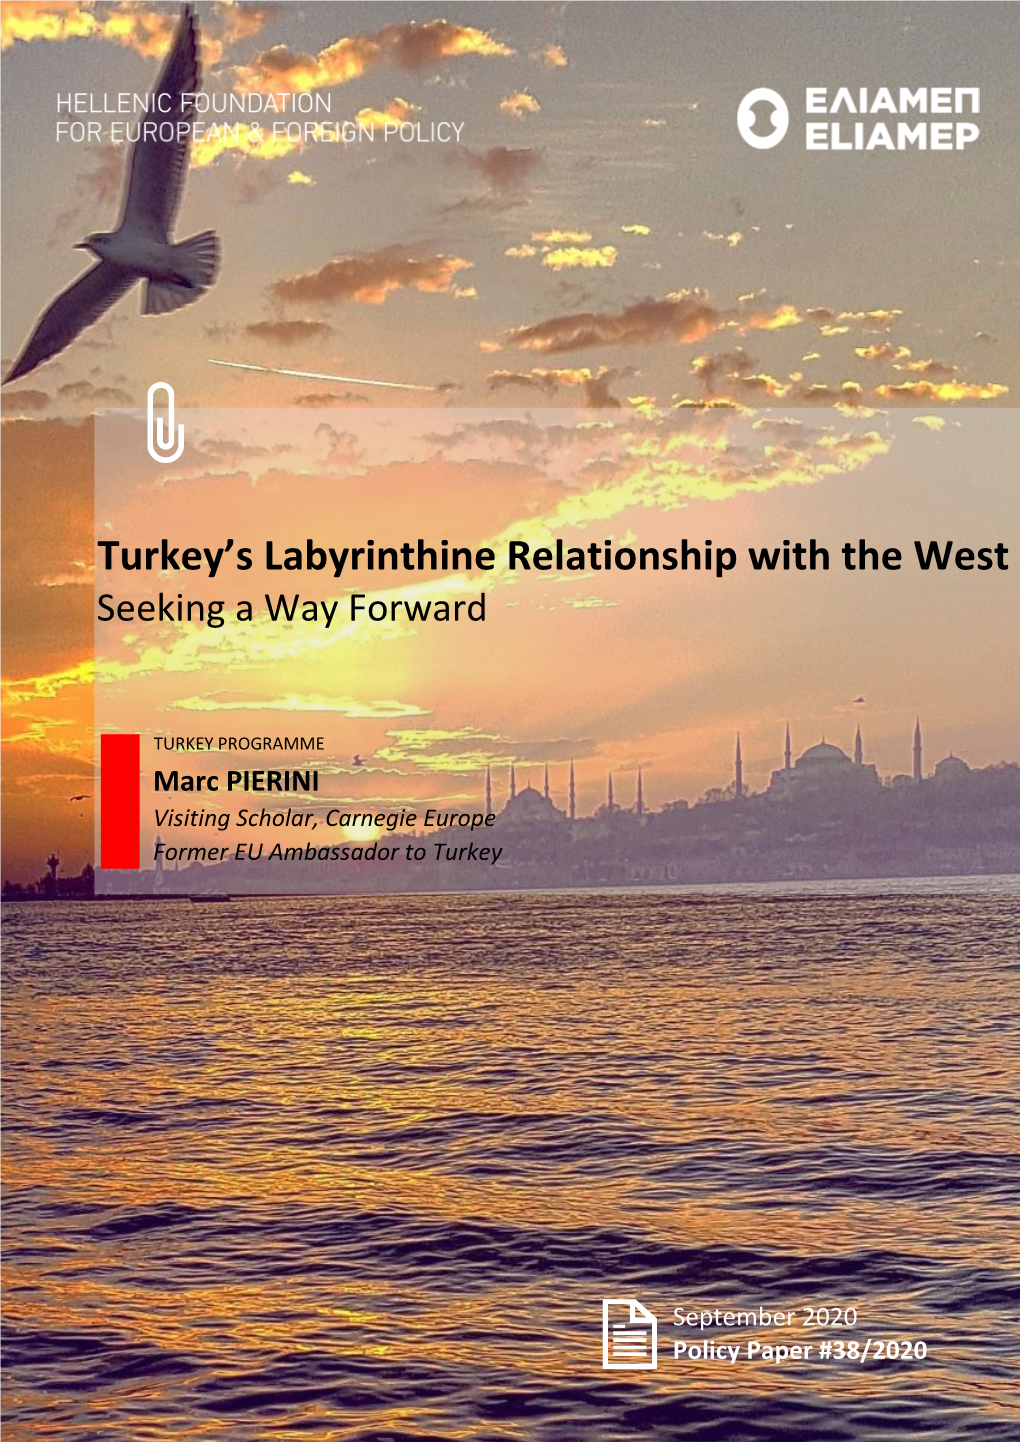 Turkey's Labyrinthine Relationship with the West: Seeking a Way Forward